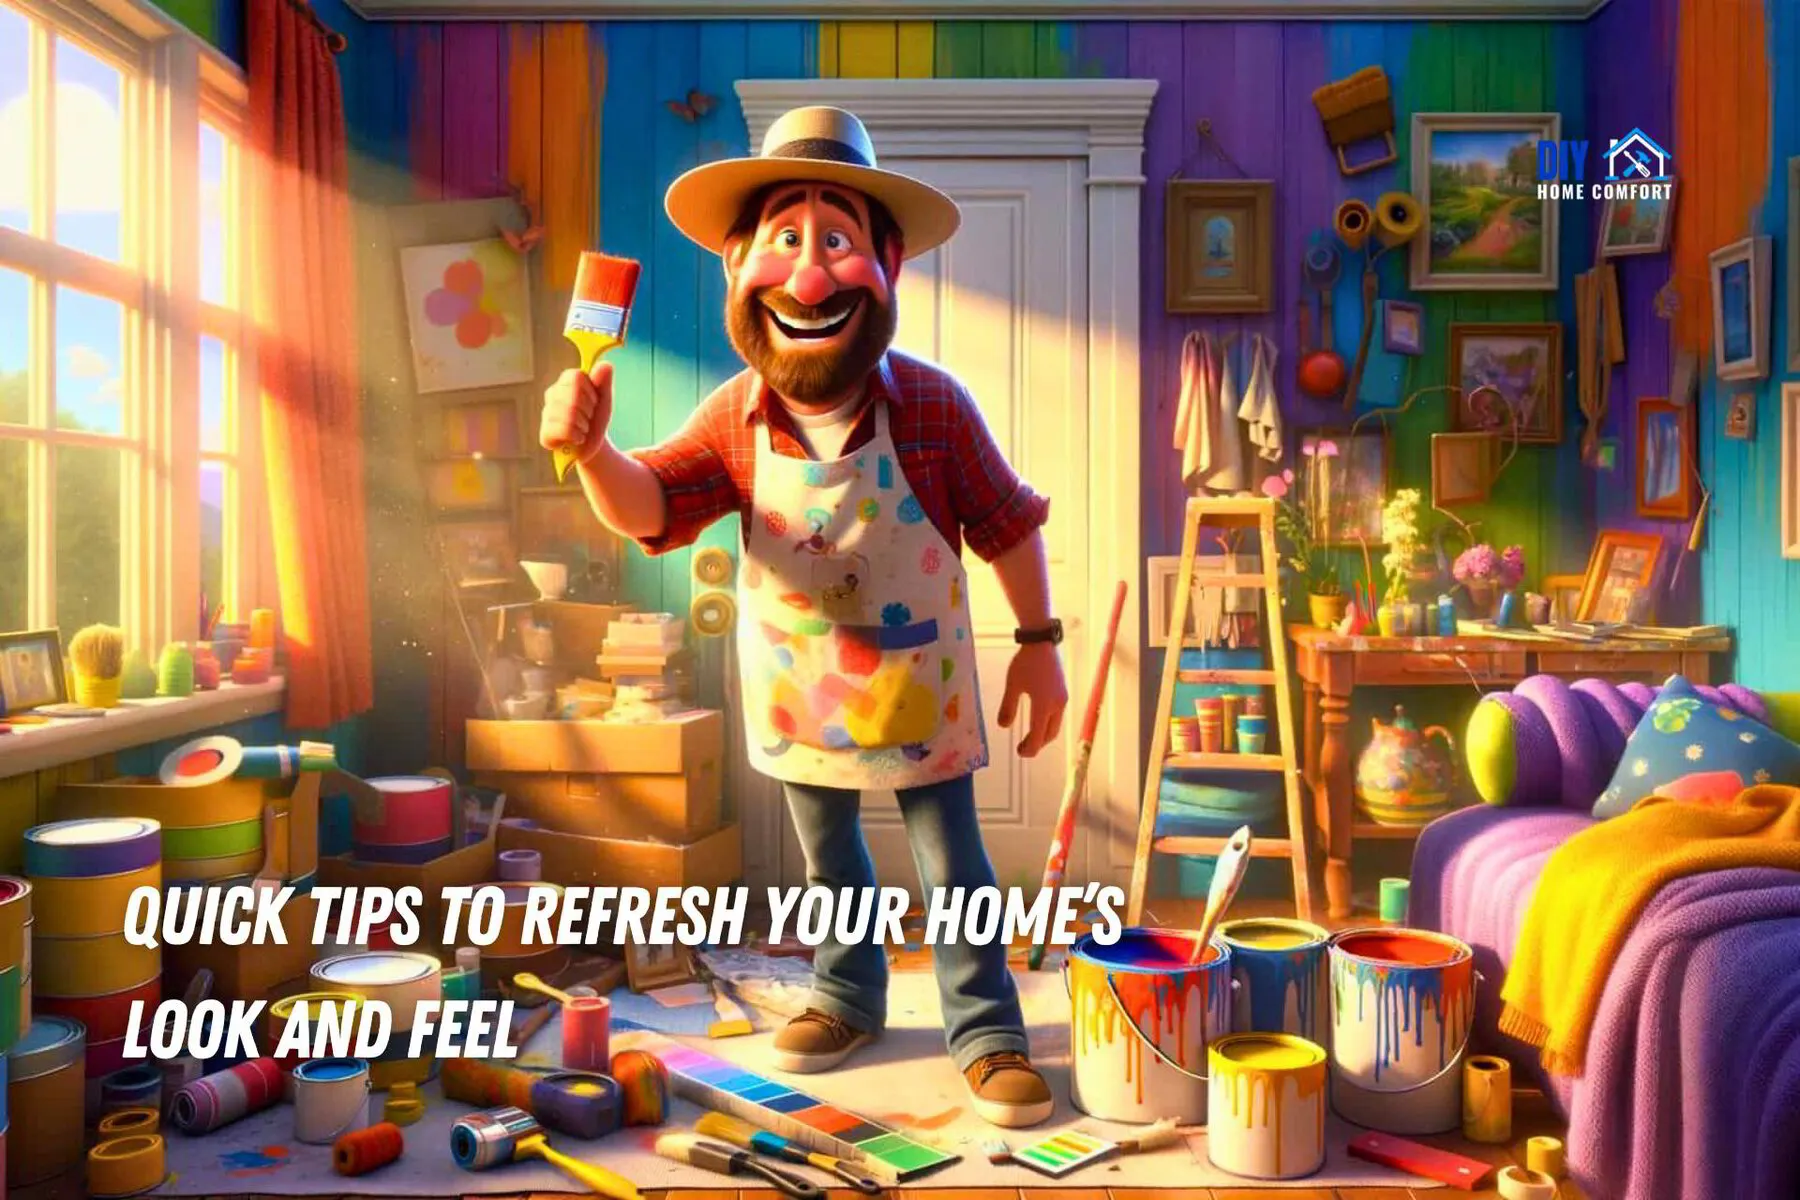 Quick Tips to Refresh Your Home’s Look and Feel | DIY Home Comfort